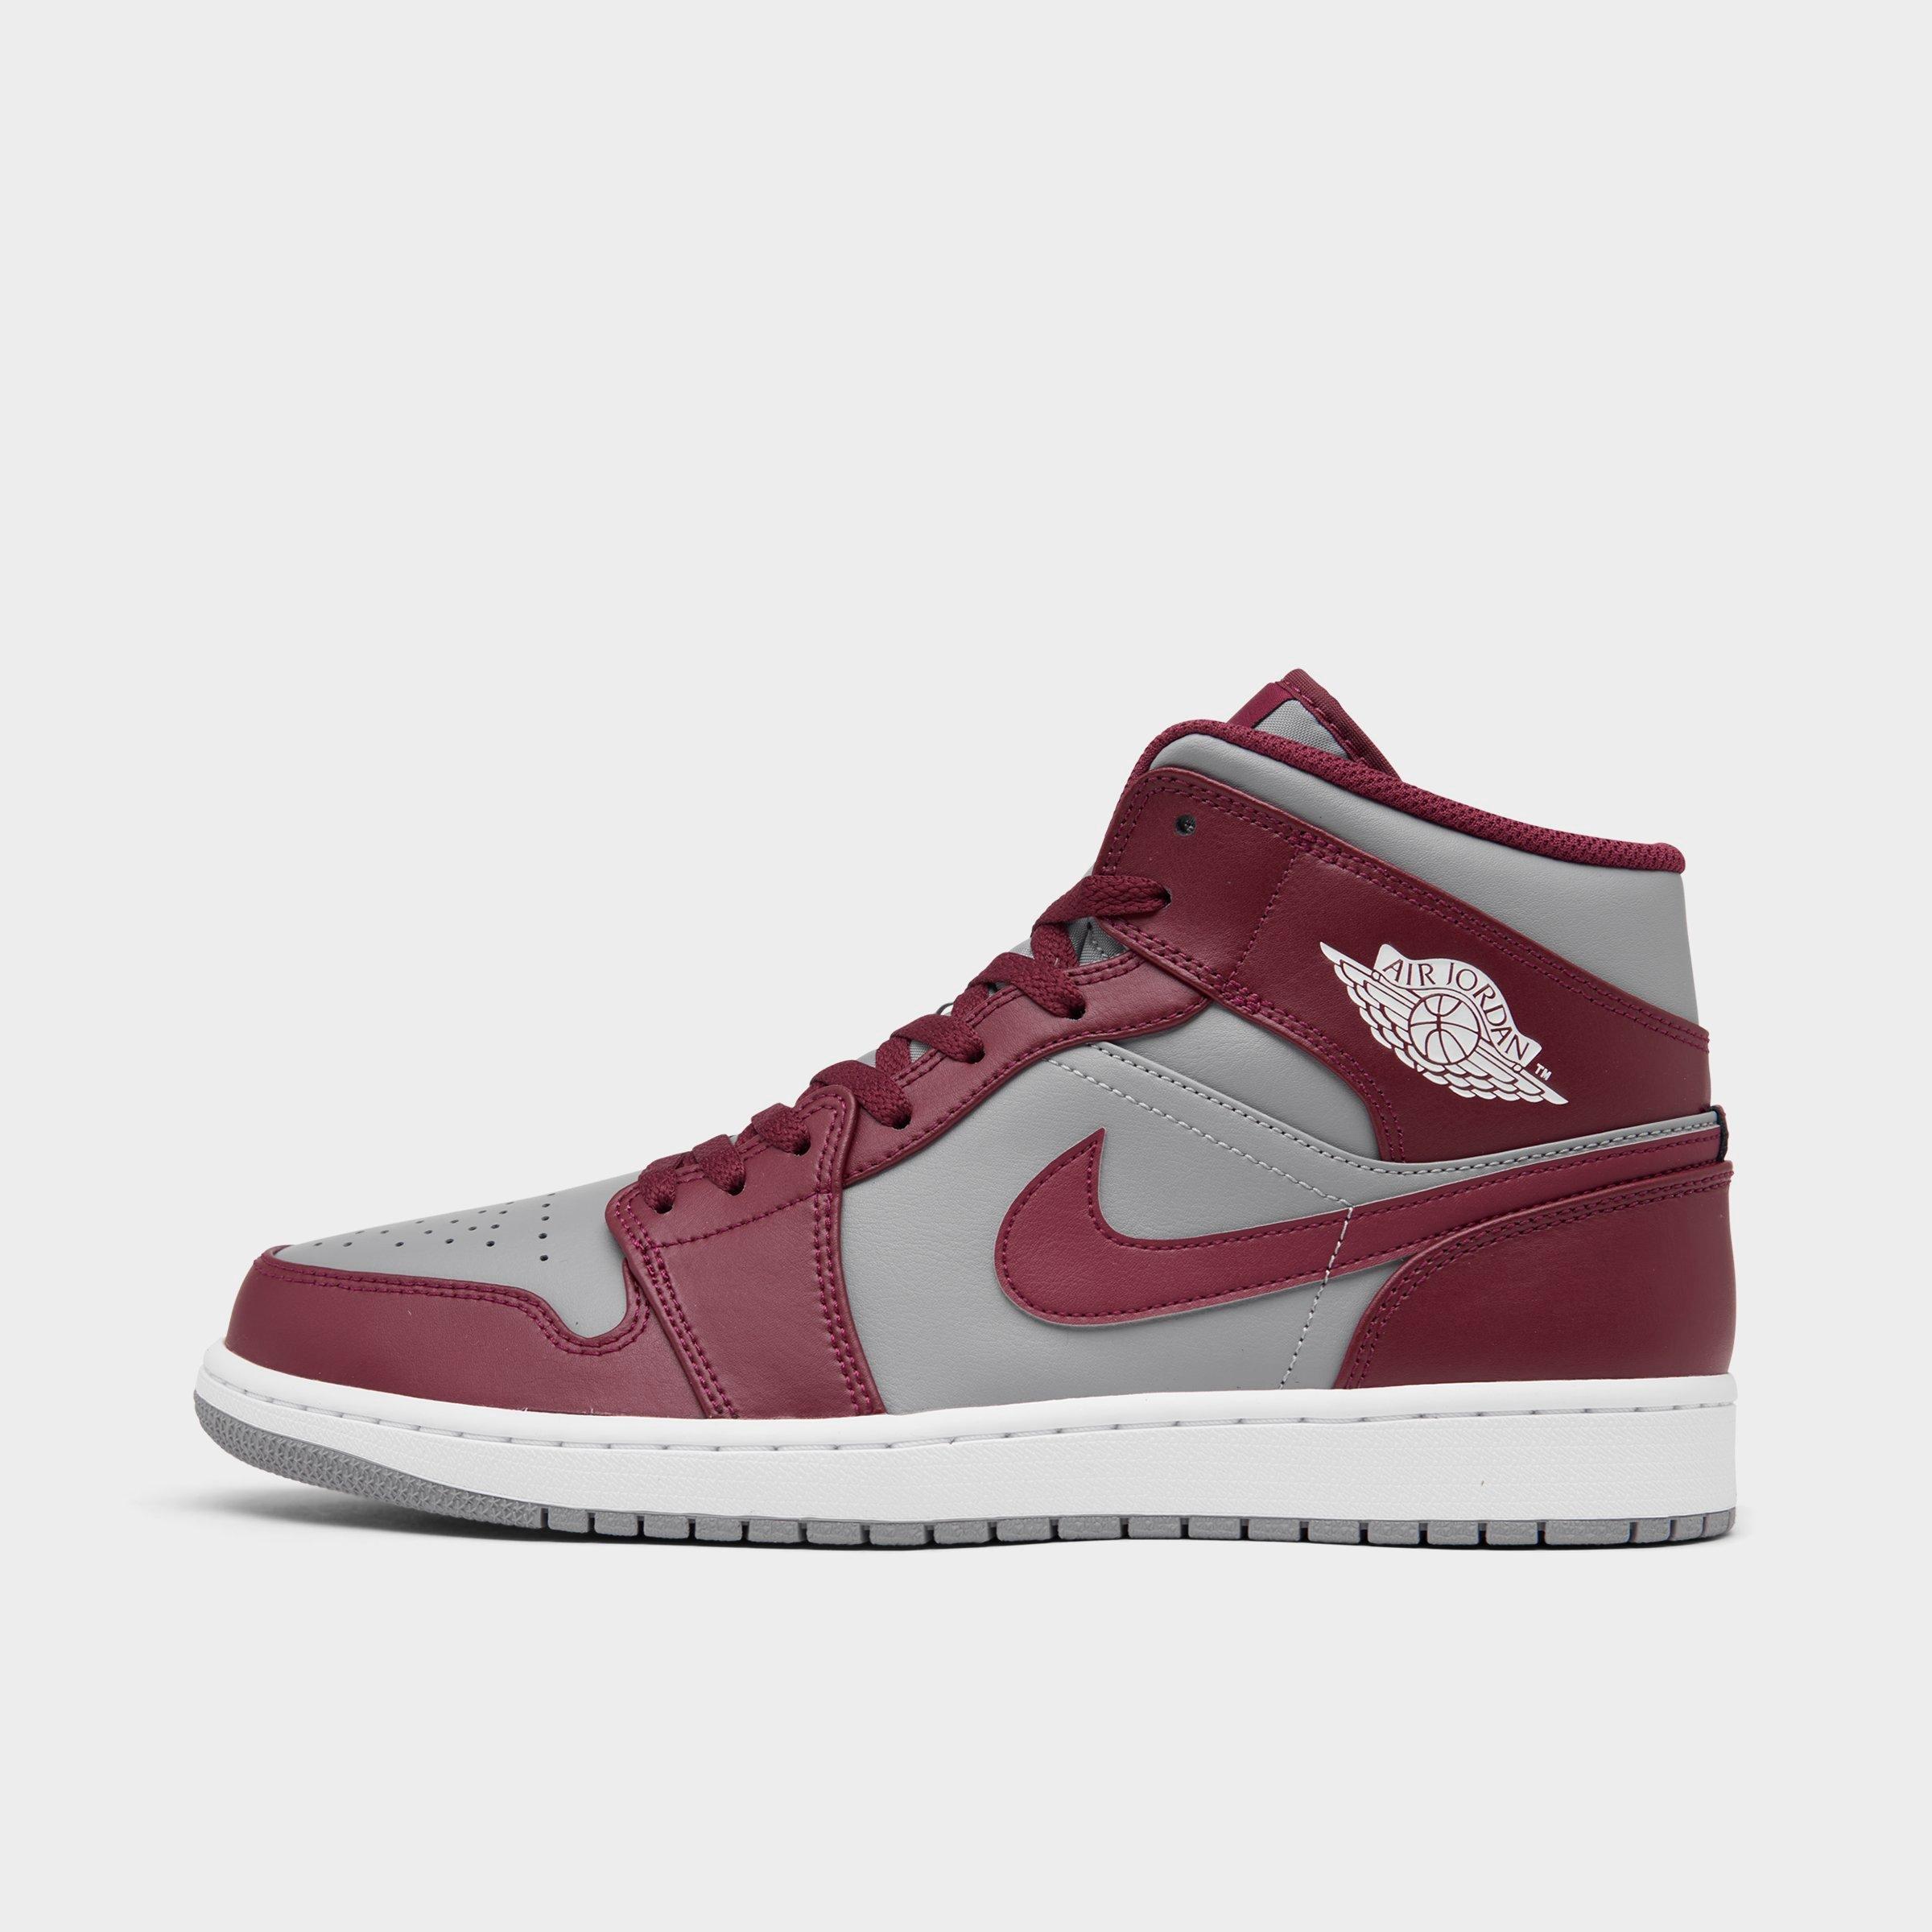 Nike Jordan Air Retro 1 Mid Casual Shoes In Cherrywood Red/white/cement Grey